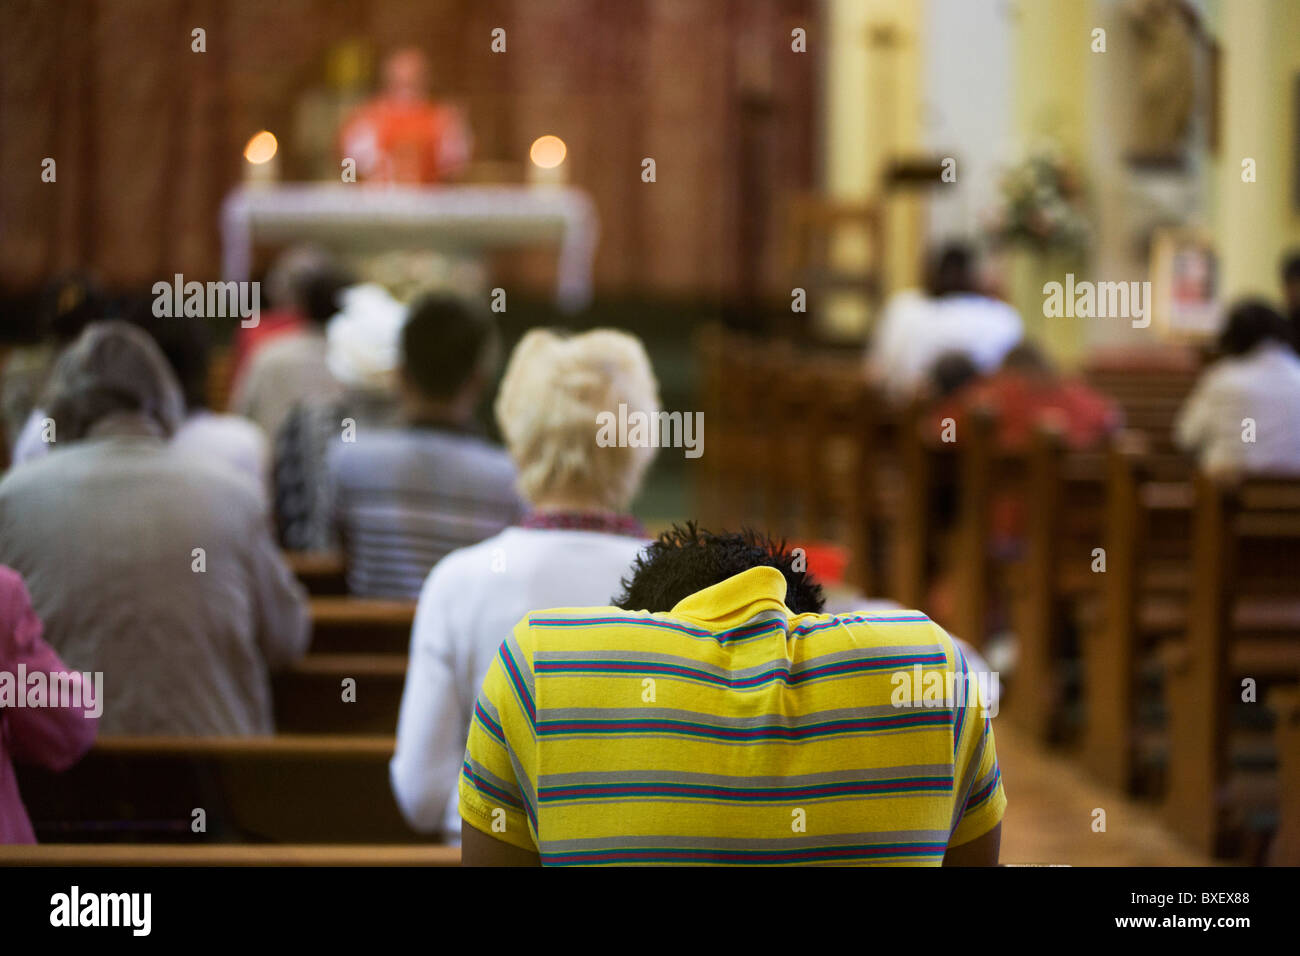 Priest gives blessings during daily Mass at St. Lawrence's Catholic church in Feltham, London. Stock Photo